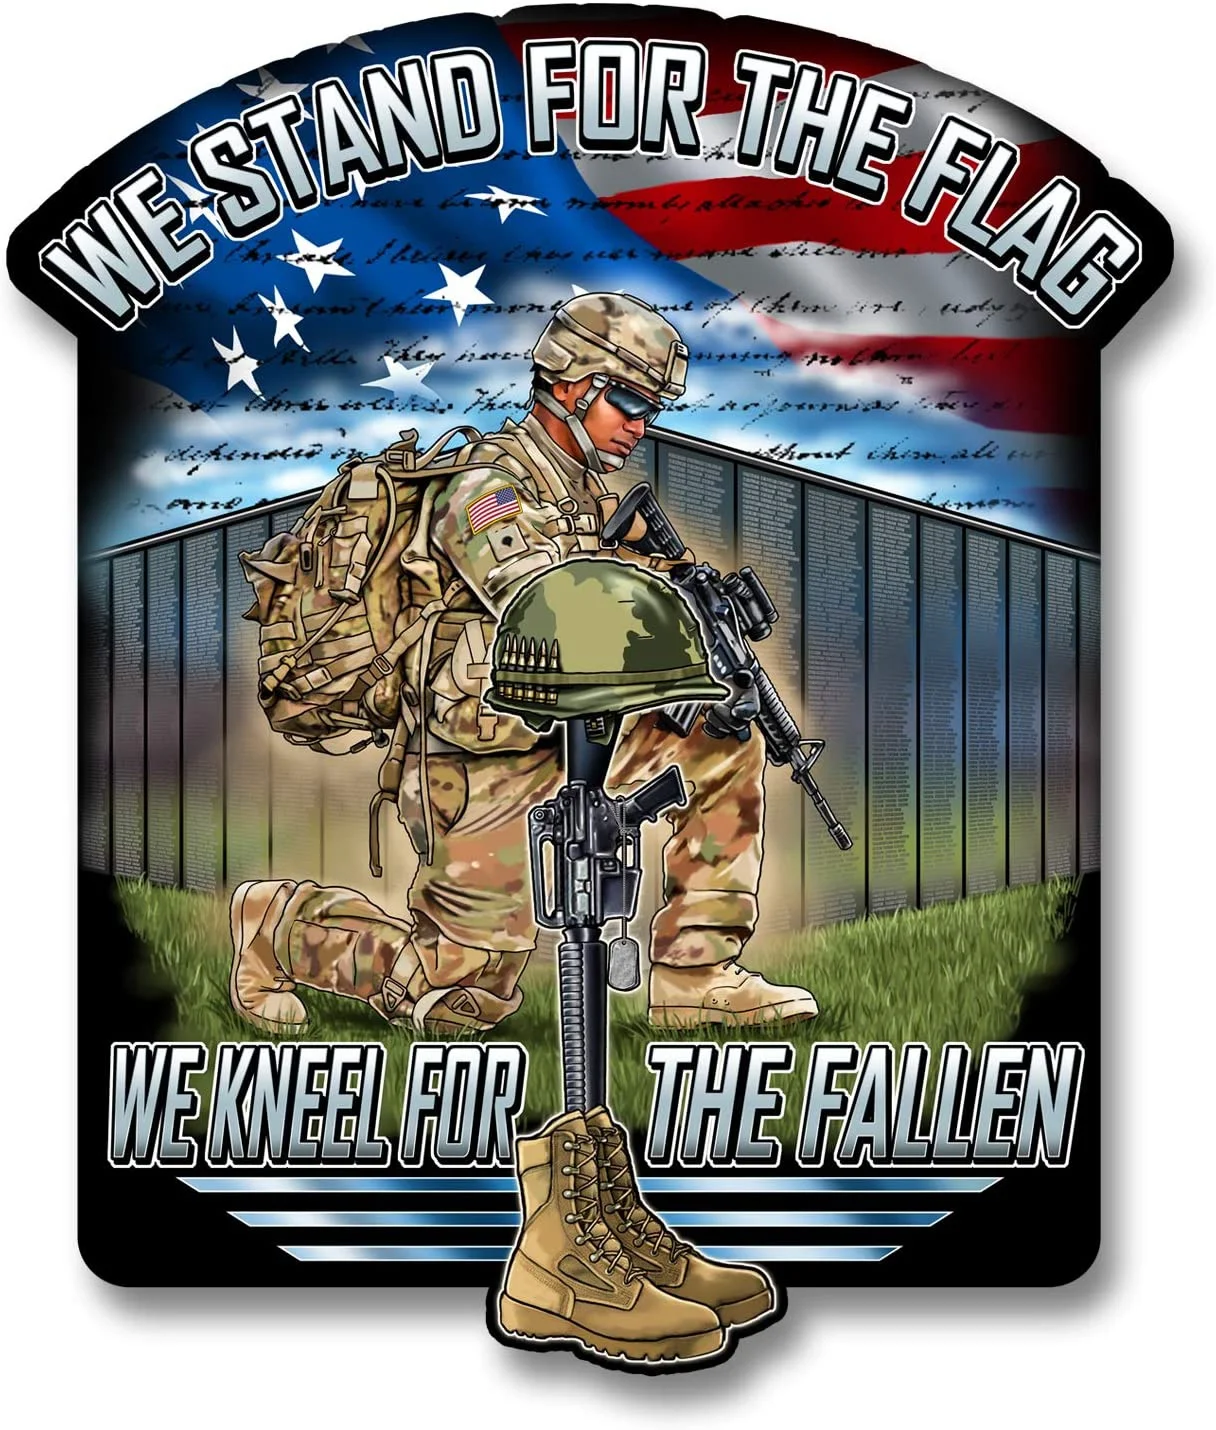 For We Stand for The Flag  Kneel   Fallen Decal  Cars, Truck